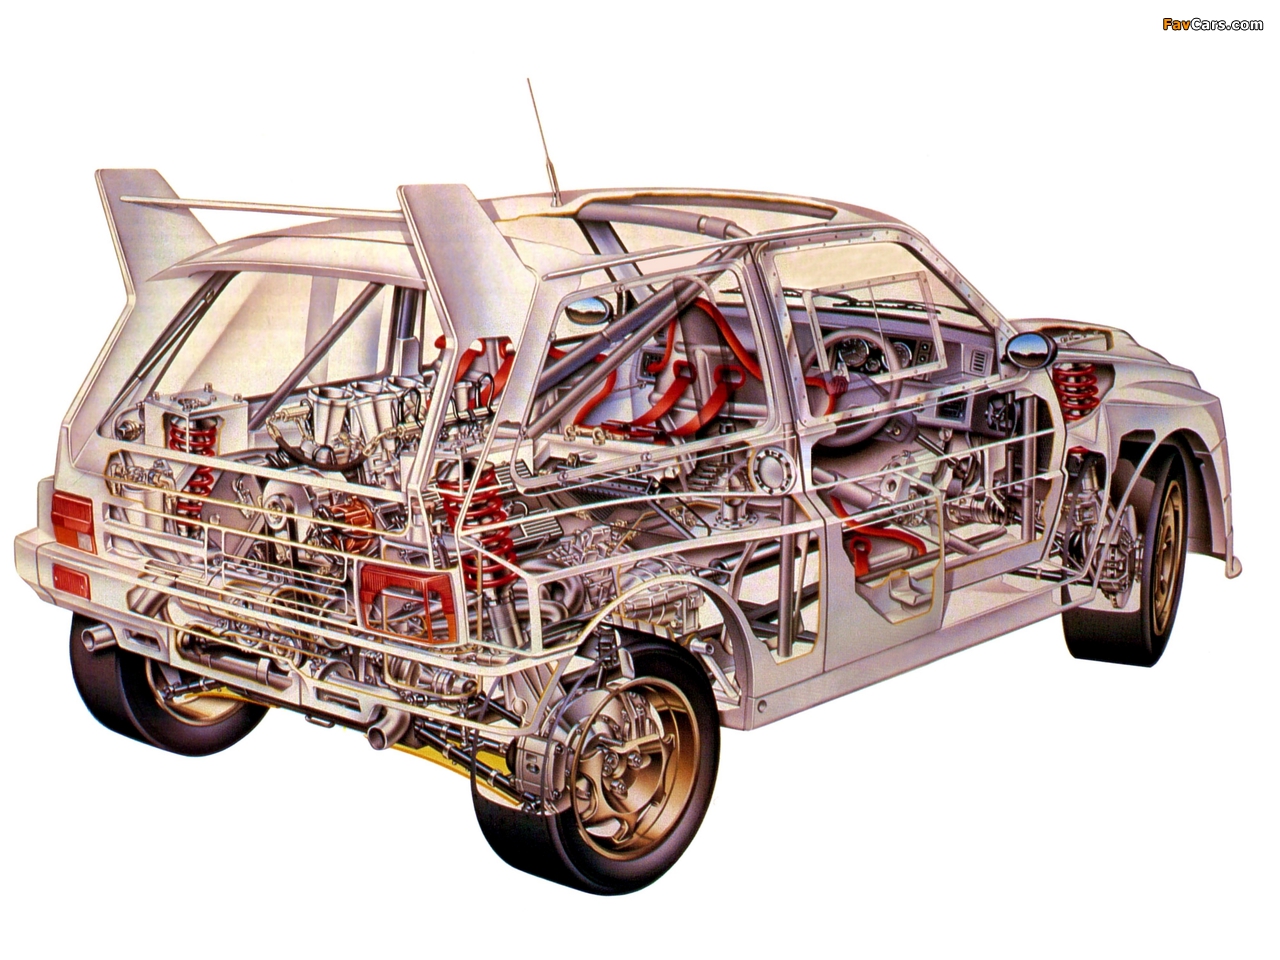 MG Metro 6R4 Group B Rally Car 1985–86 pictures (1280 x 960)